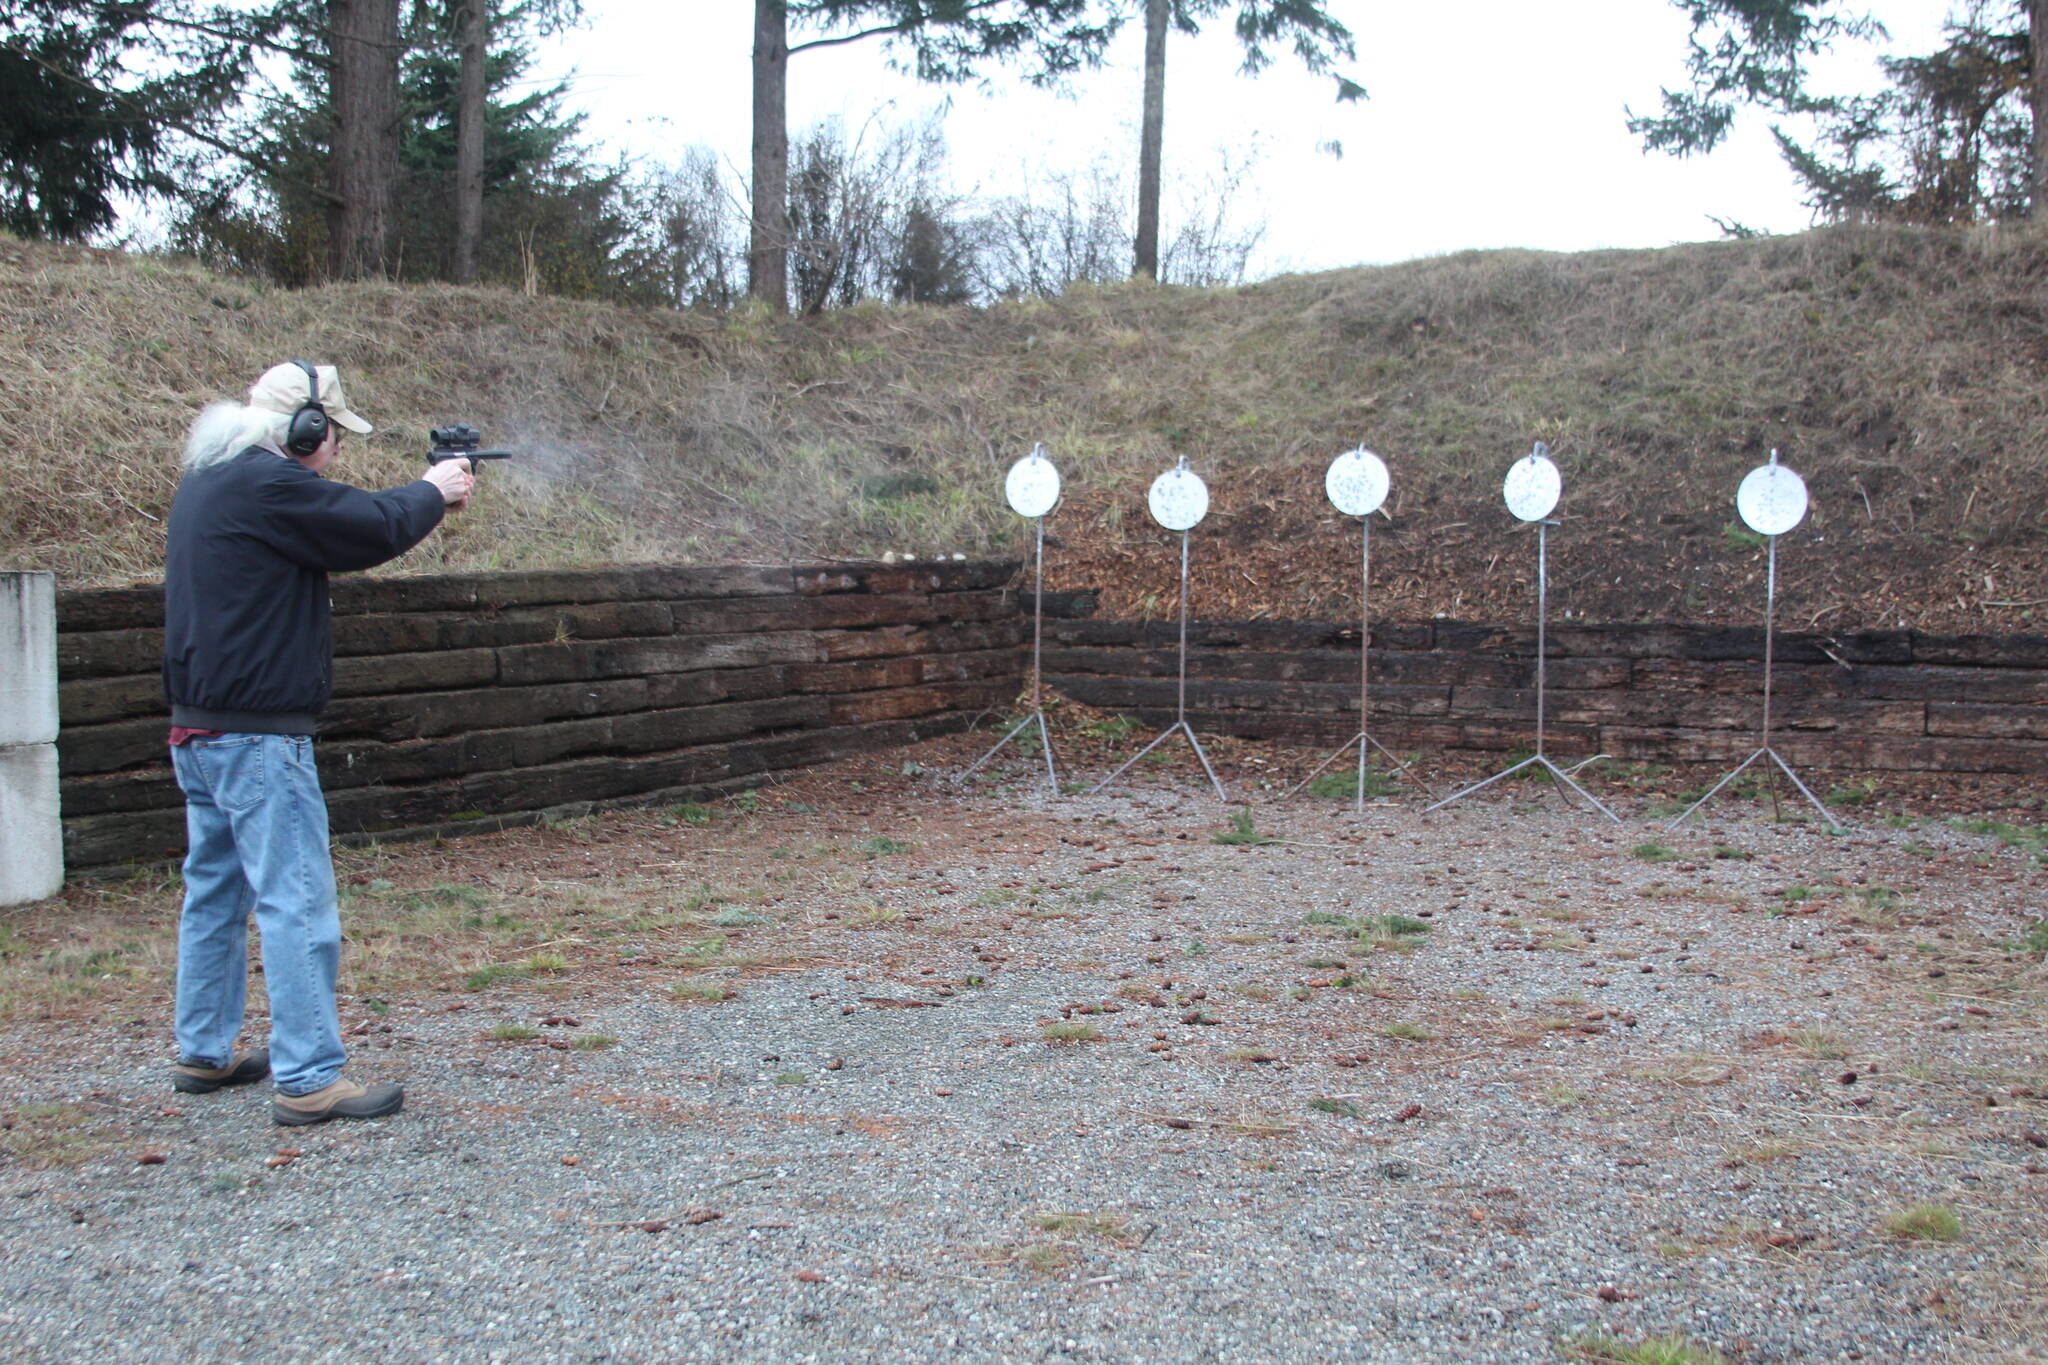 Photo by Karina Andrew/Whidbey News-Times
Al Lindell takes a few practice shots at the Central Whidbey Sportsmen’s Association in Coupeville.